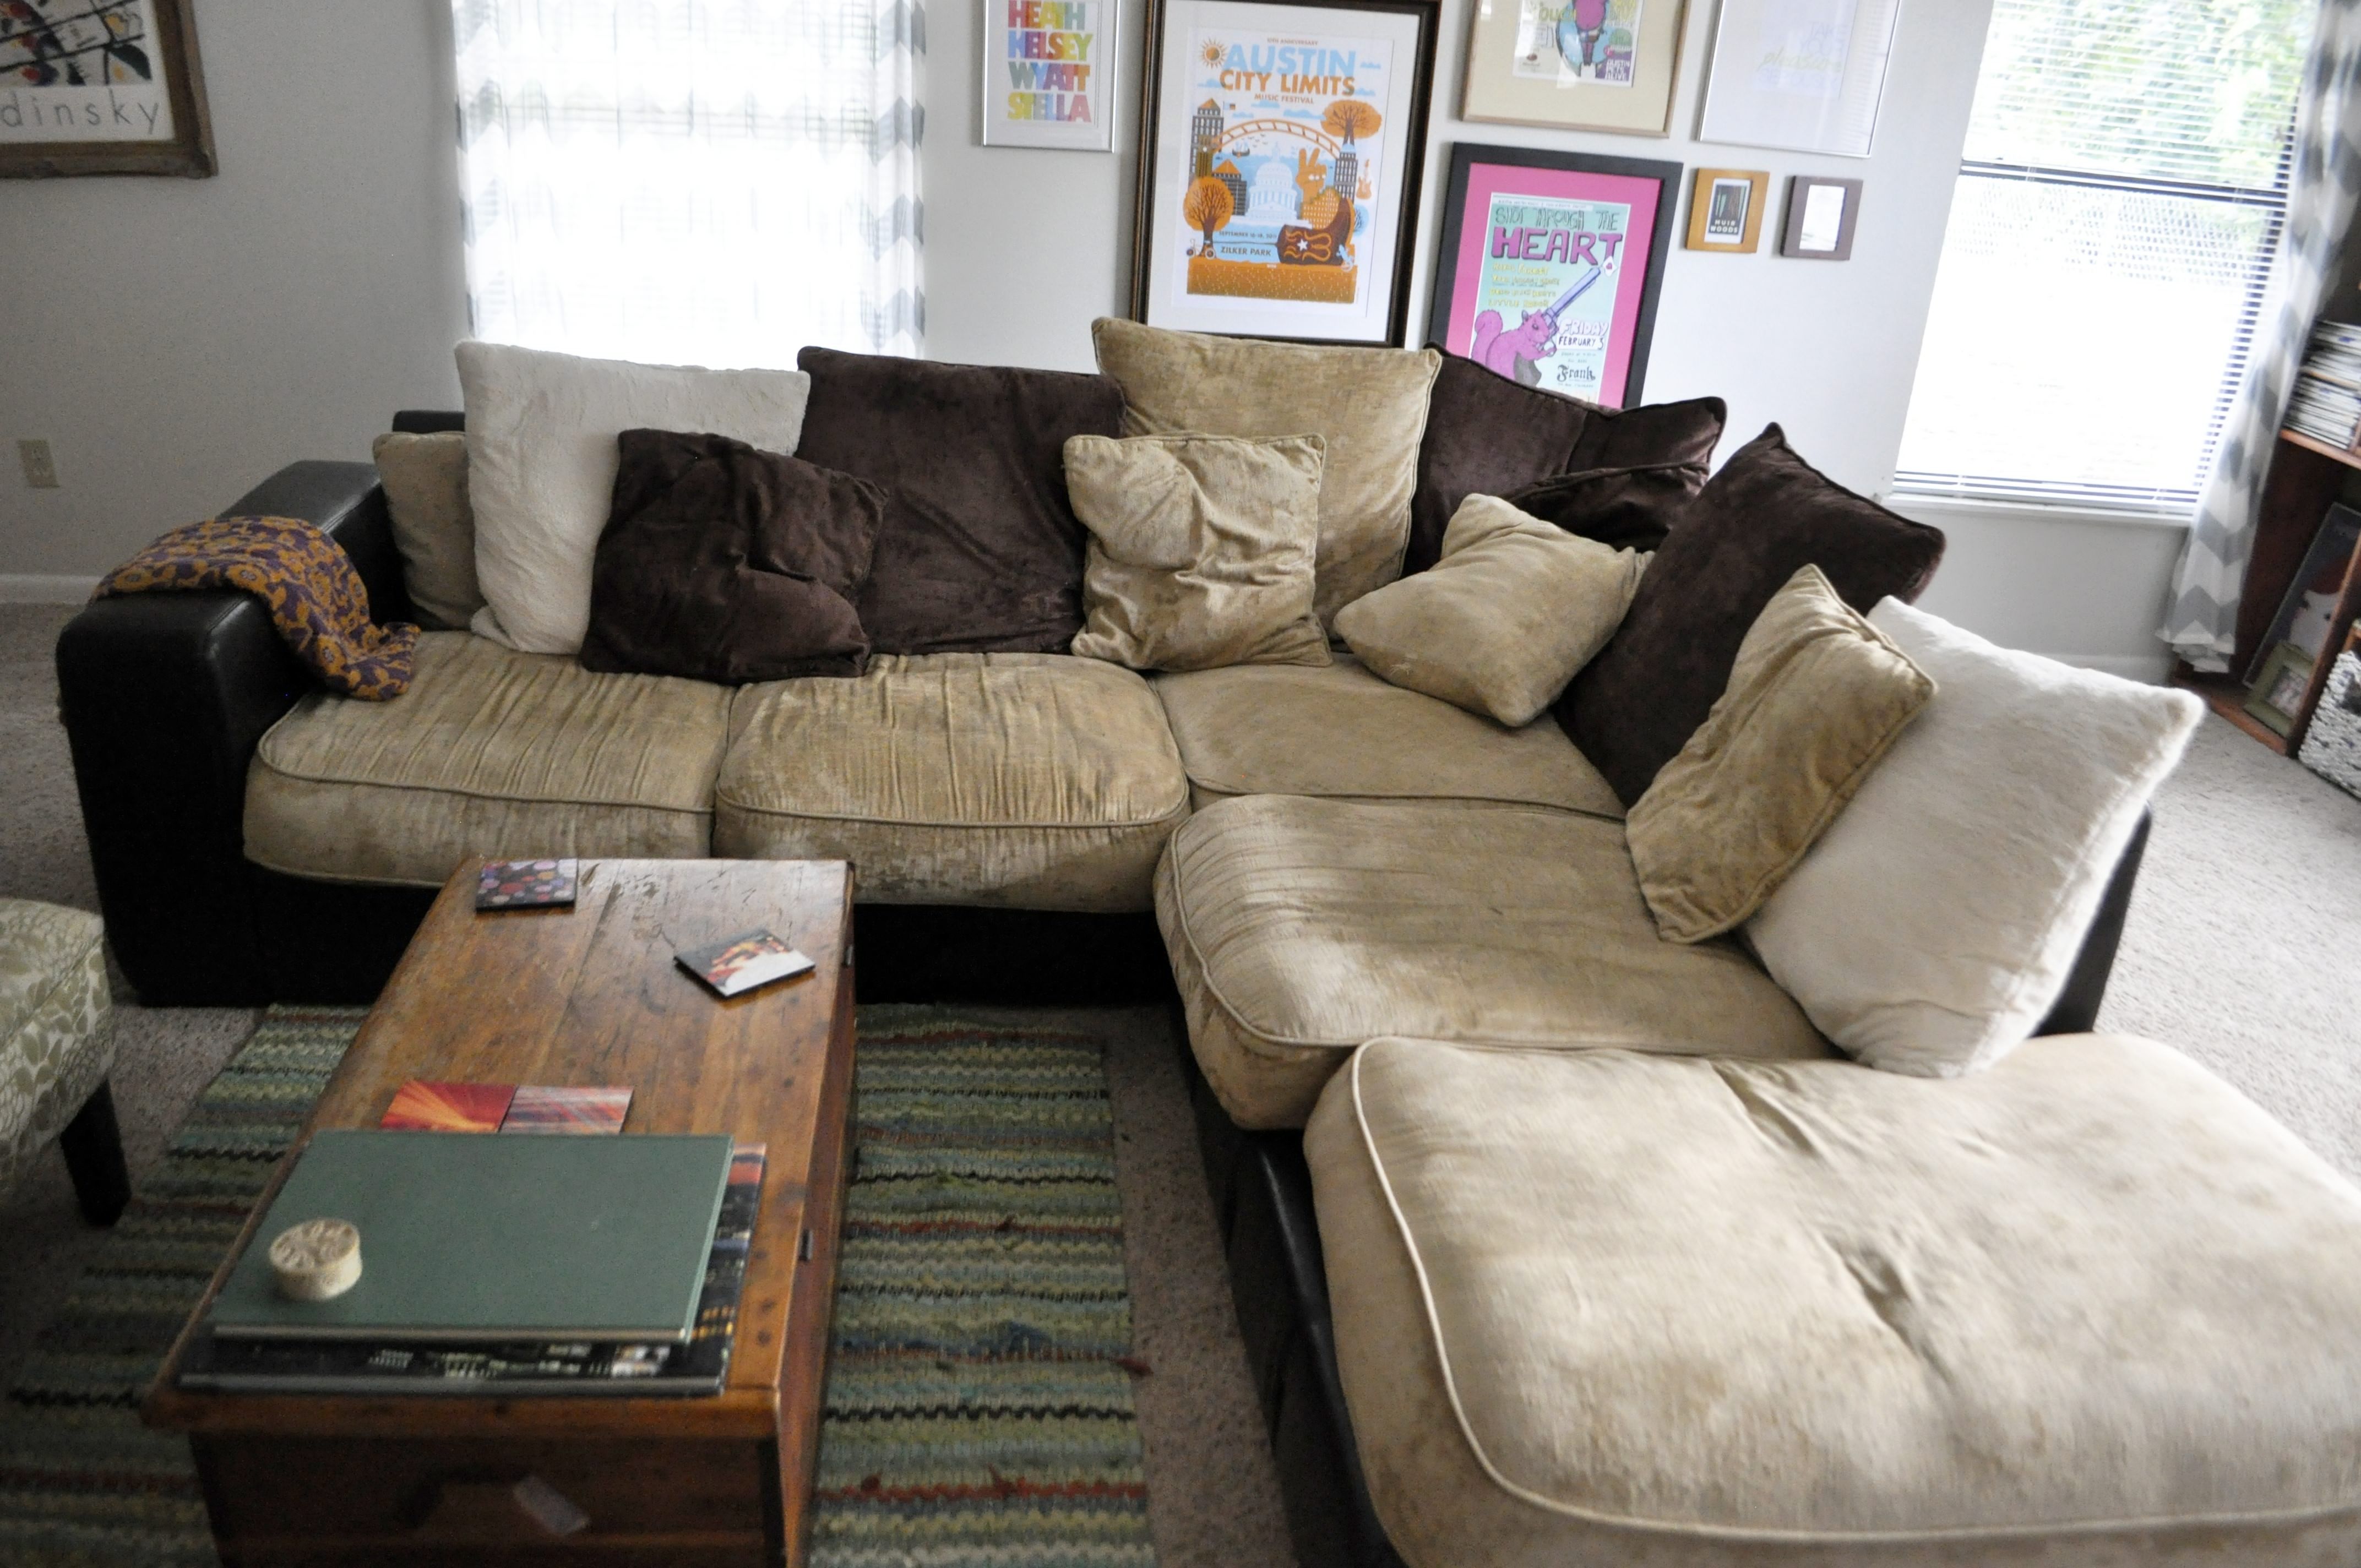 Picture Of Comfortable Sectional Sofa On Home Remodel Ideas Jk22 Regarding Comfy Sectional Sofa (View 8 of 12)